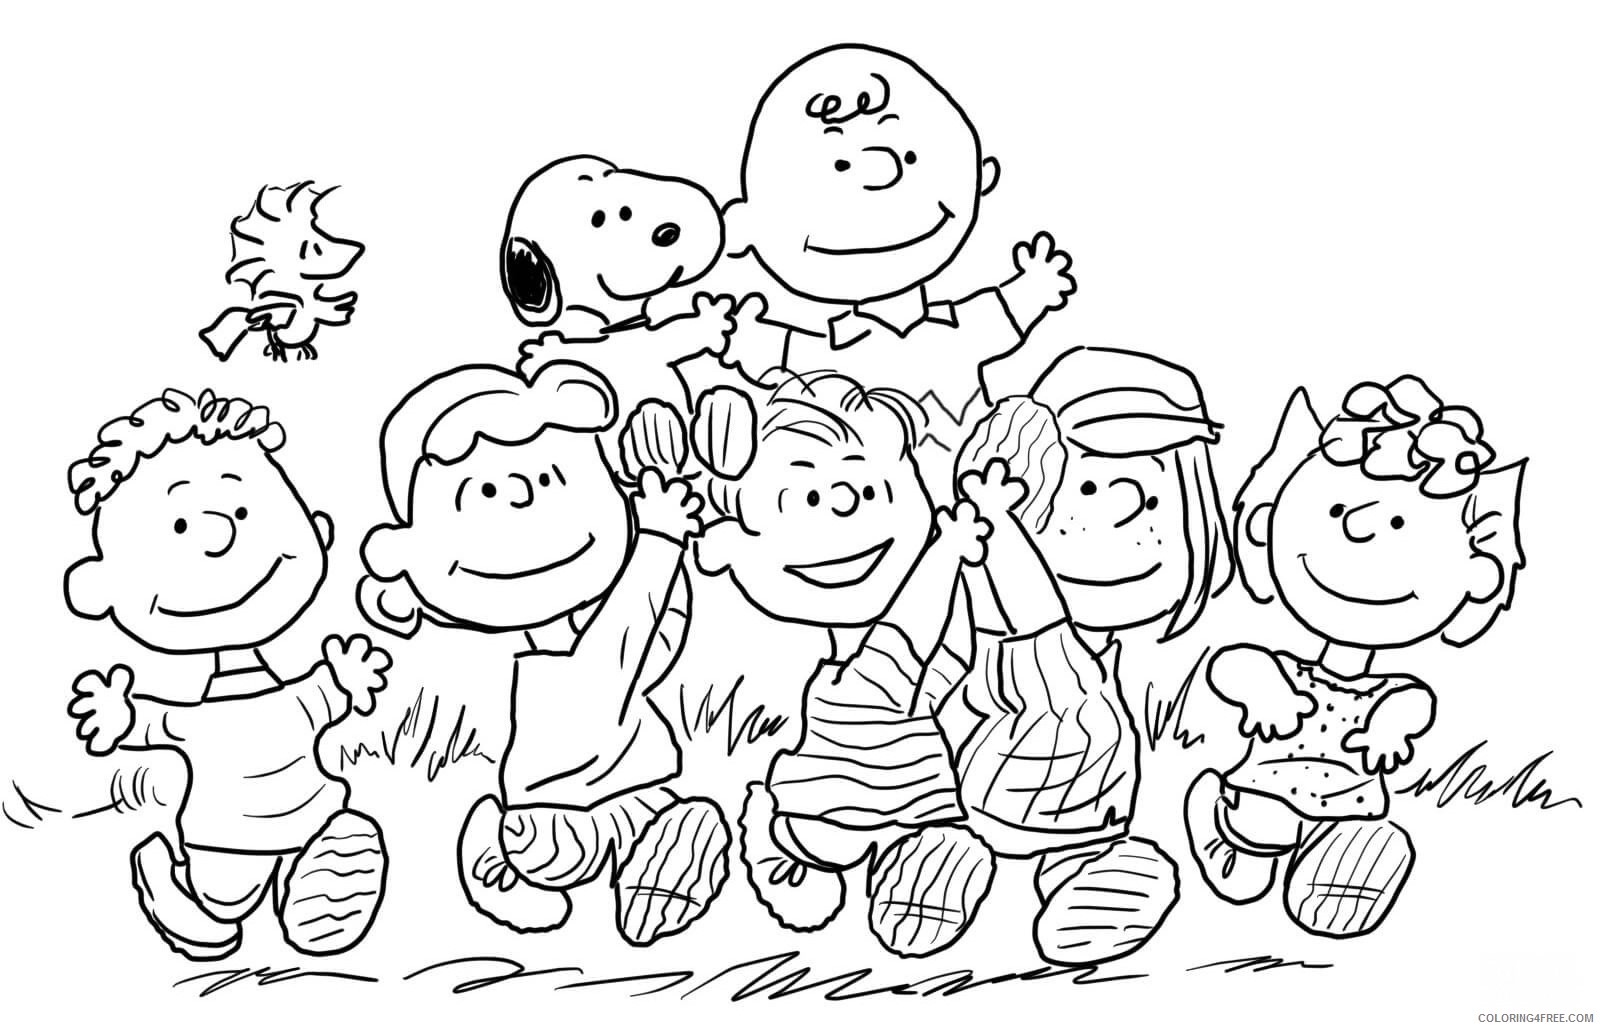 Peanuts Coloring Pages Cartoons peanut movie_18 Printable 2020 4796 Coloring4free